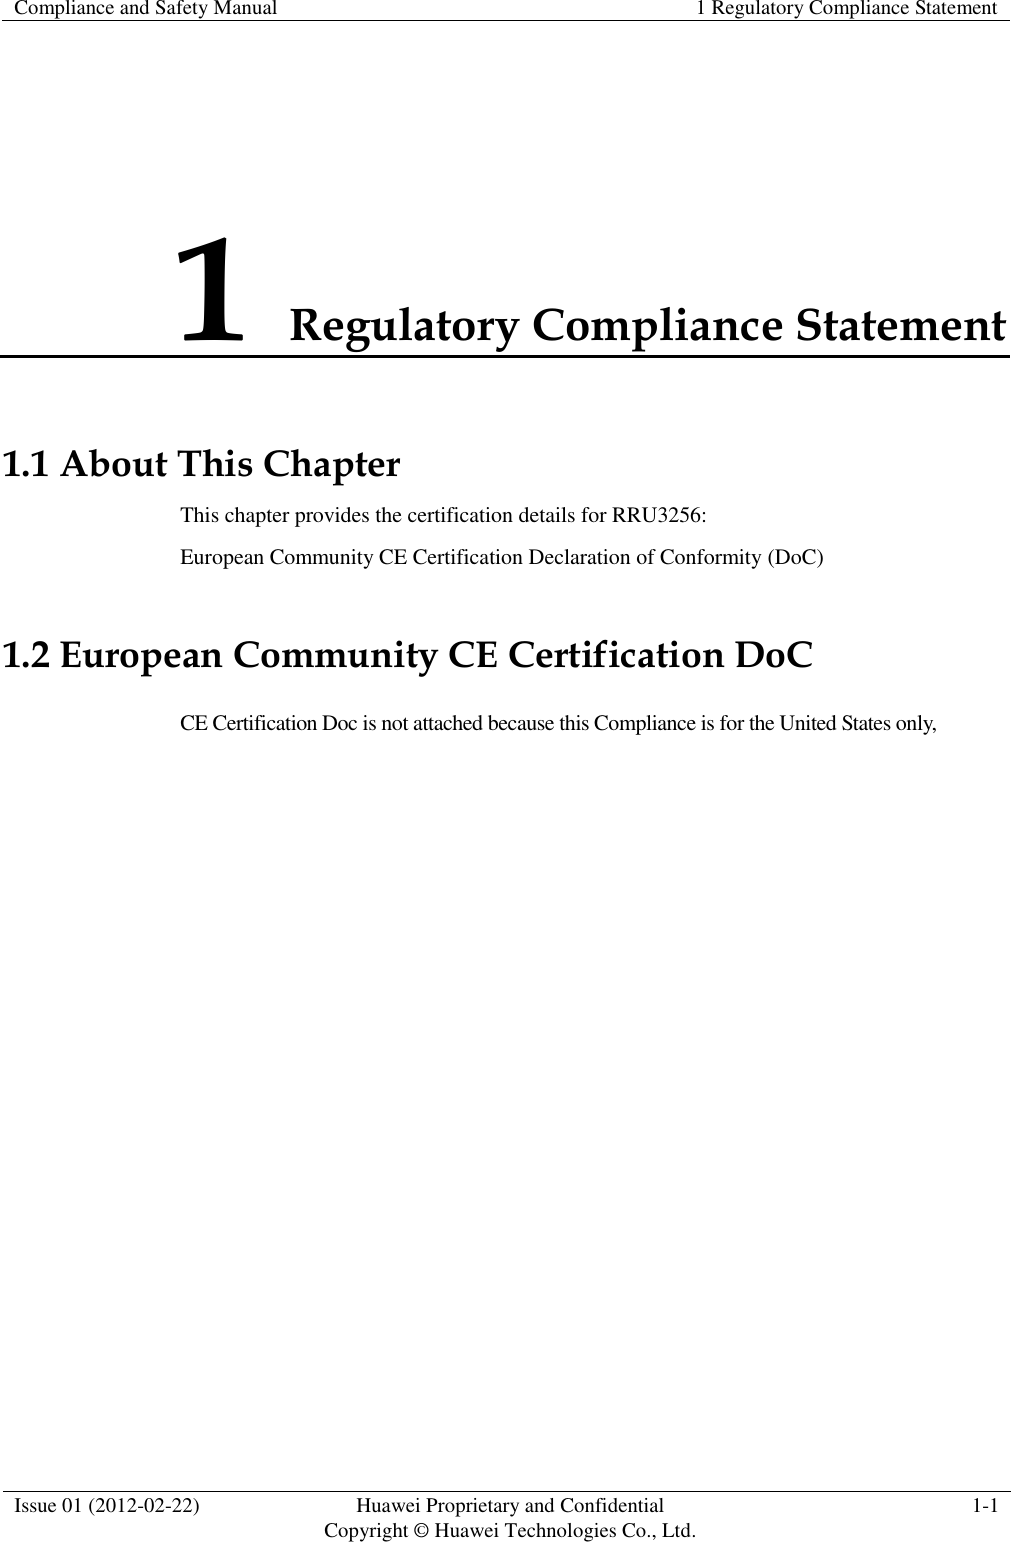 Compliance and Safety Manual 1 Regulatory Compliance Statement  Issue 01 (2012-02-22) Huawei Proprietary and Confidential           Copyright © Huawei Technologies Co., Ltd. 1-1  1 Regulatory Compliance Statement 1.1 About This Chapter This chapter provides the certification details for RRU3256: European Community CE Certification Declaration of Conformity (DoC) 1.2 European Community CE Certification DoC CE Certification Doc is not attached because this Compliance is for the United States only,   